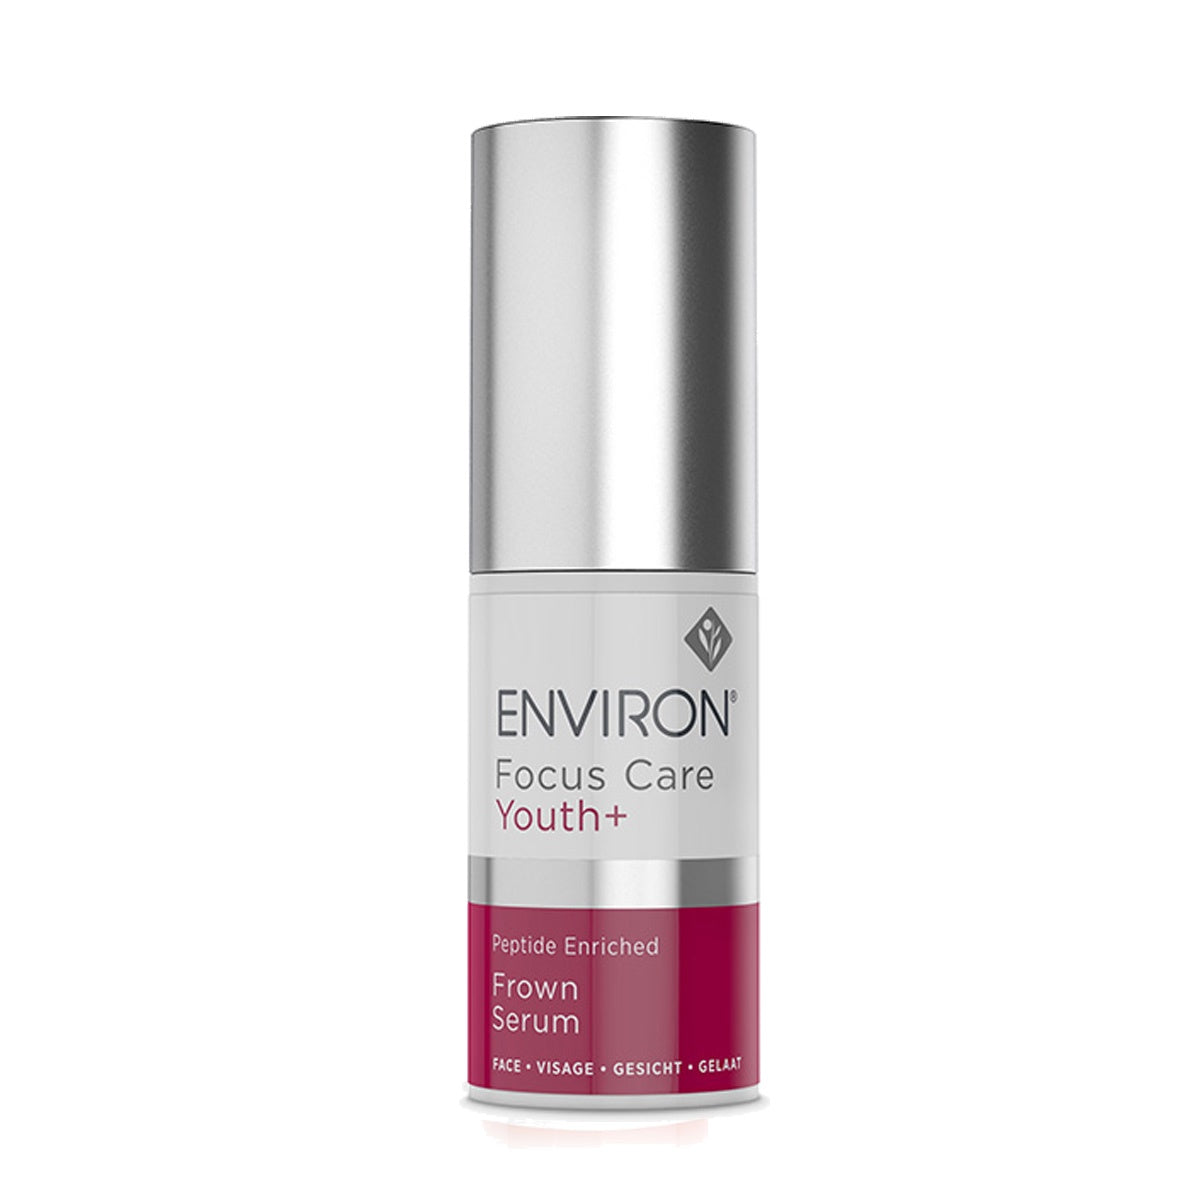 ENVIRON (Focus Care Youth+) Frown Serum